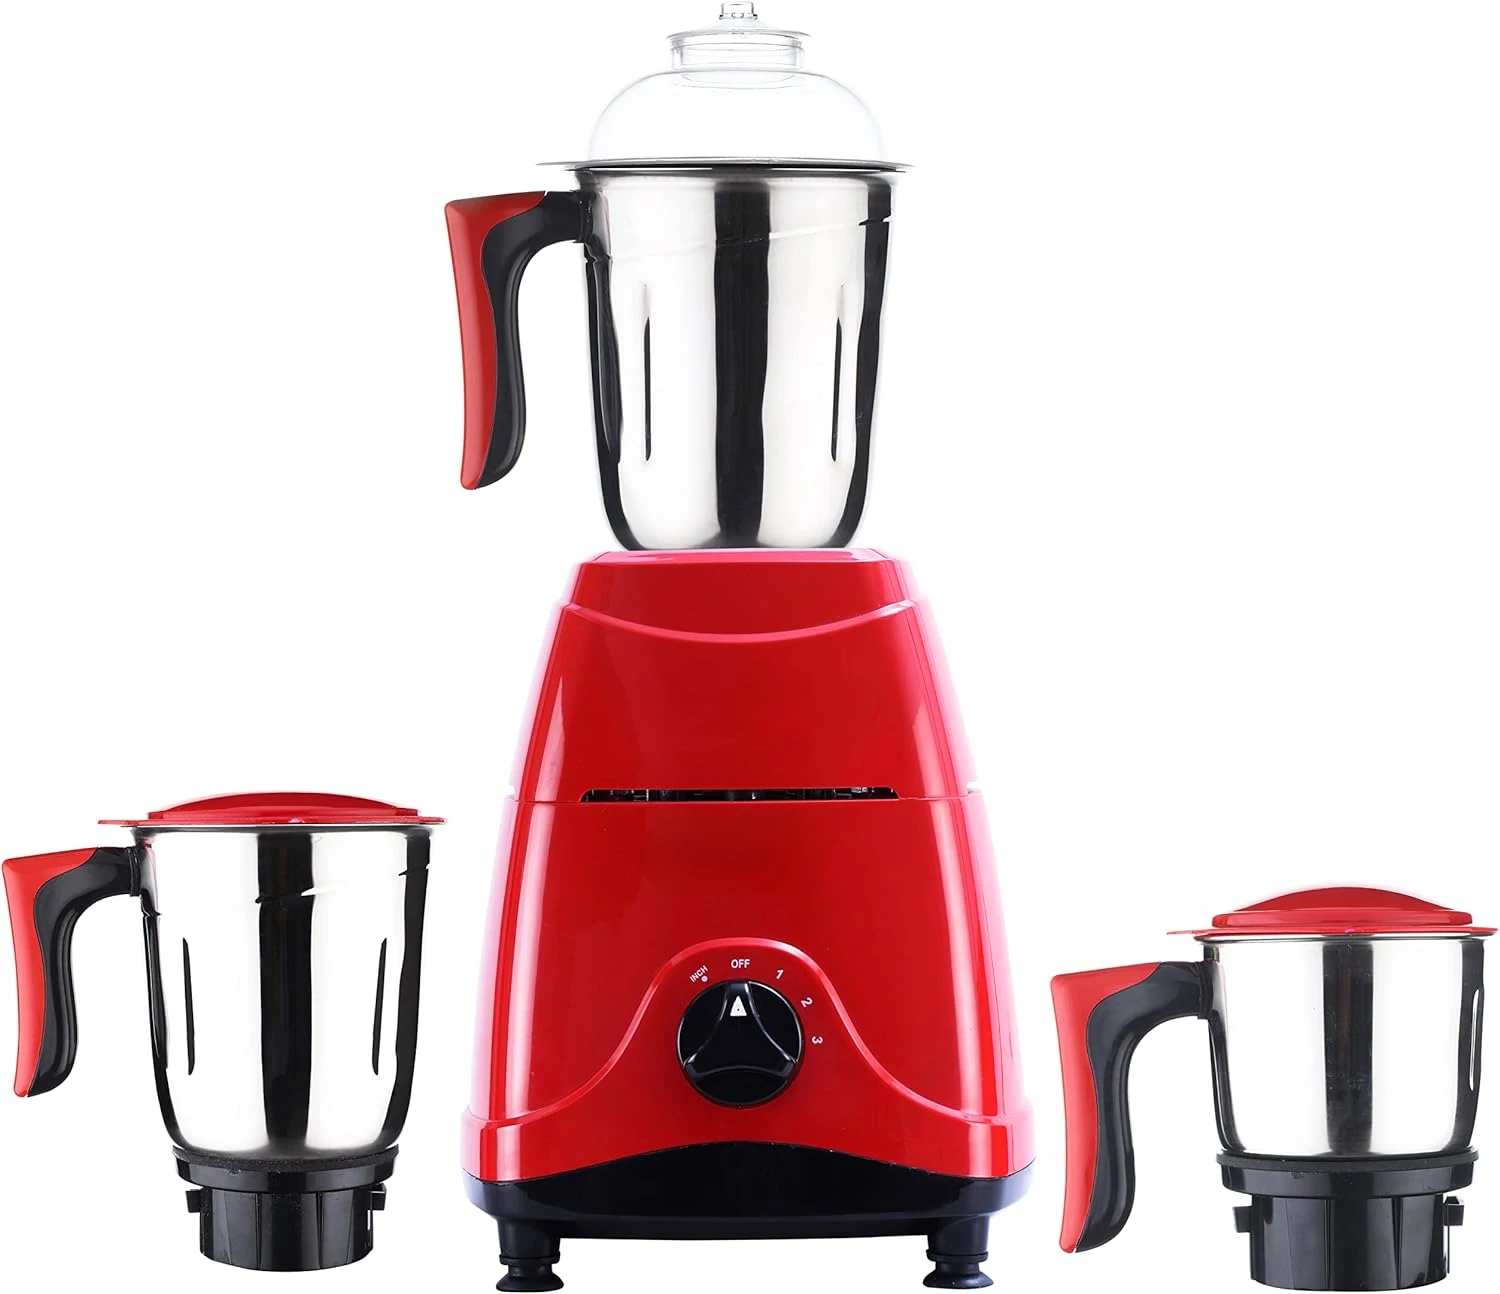 

Mixer Grinder | 3 Stainless Steel Jars | 650 Watts | 110-Volts | Red